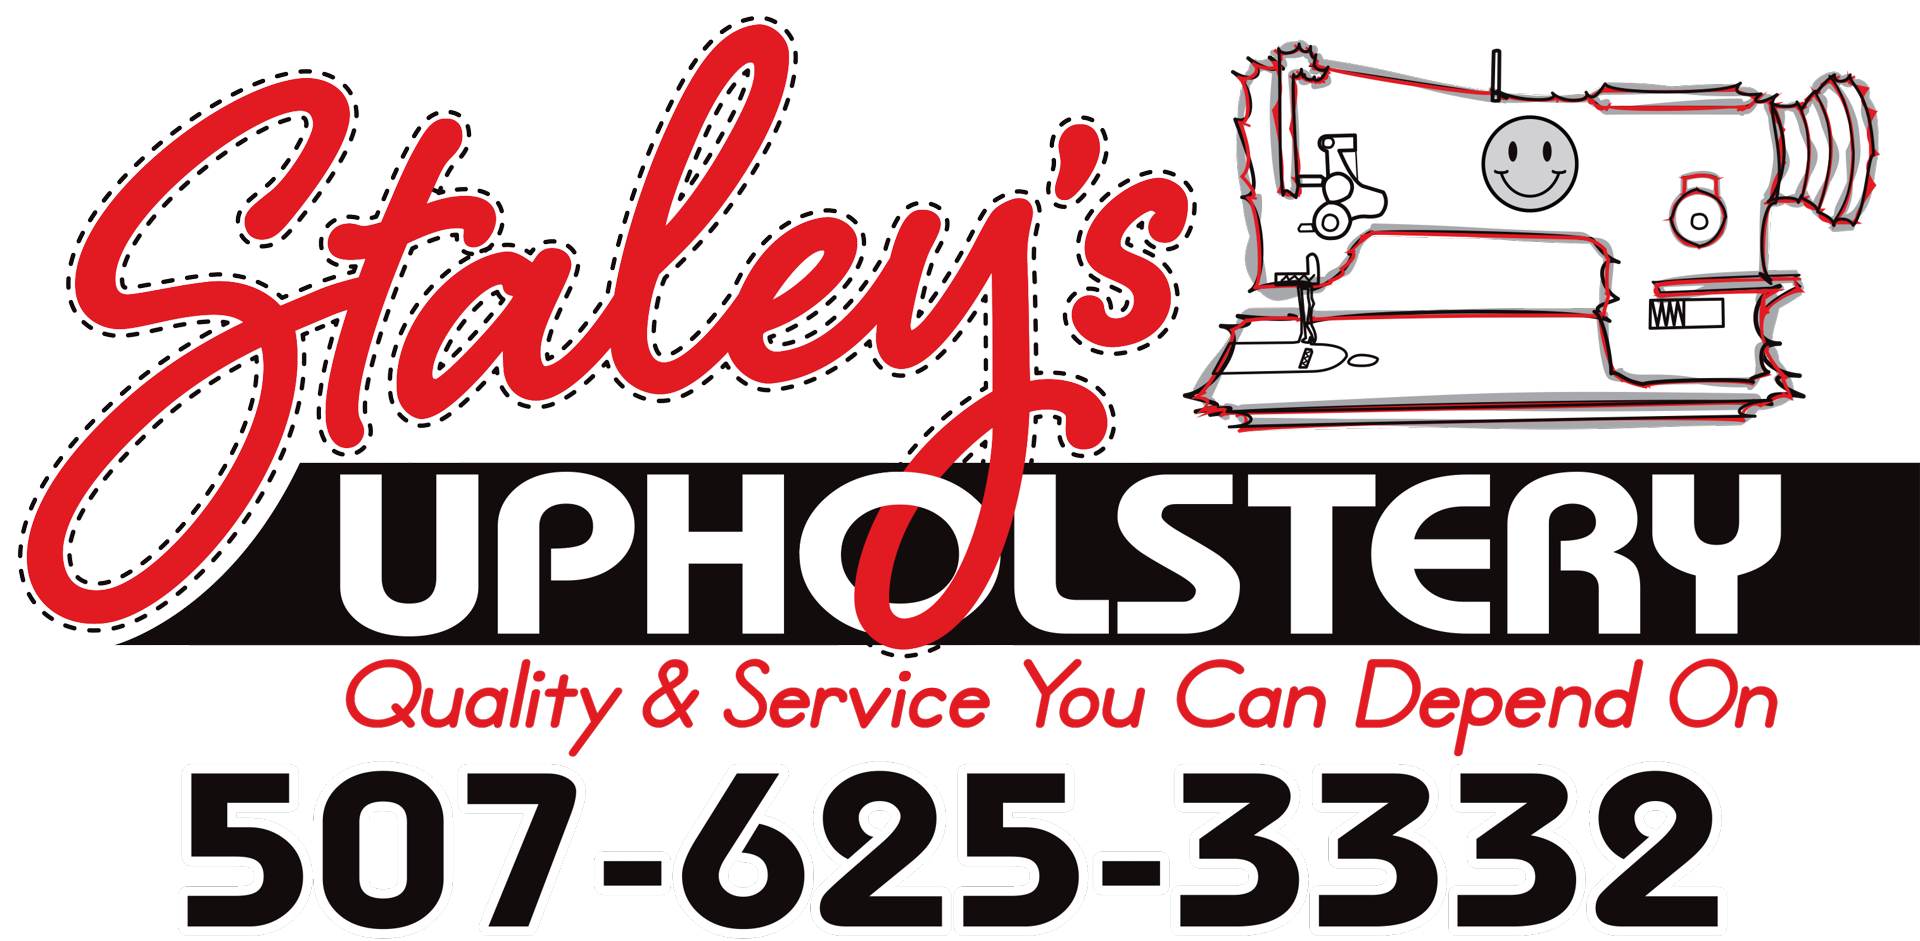 Staley's Upholstery